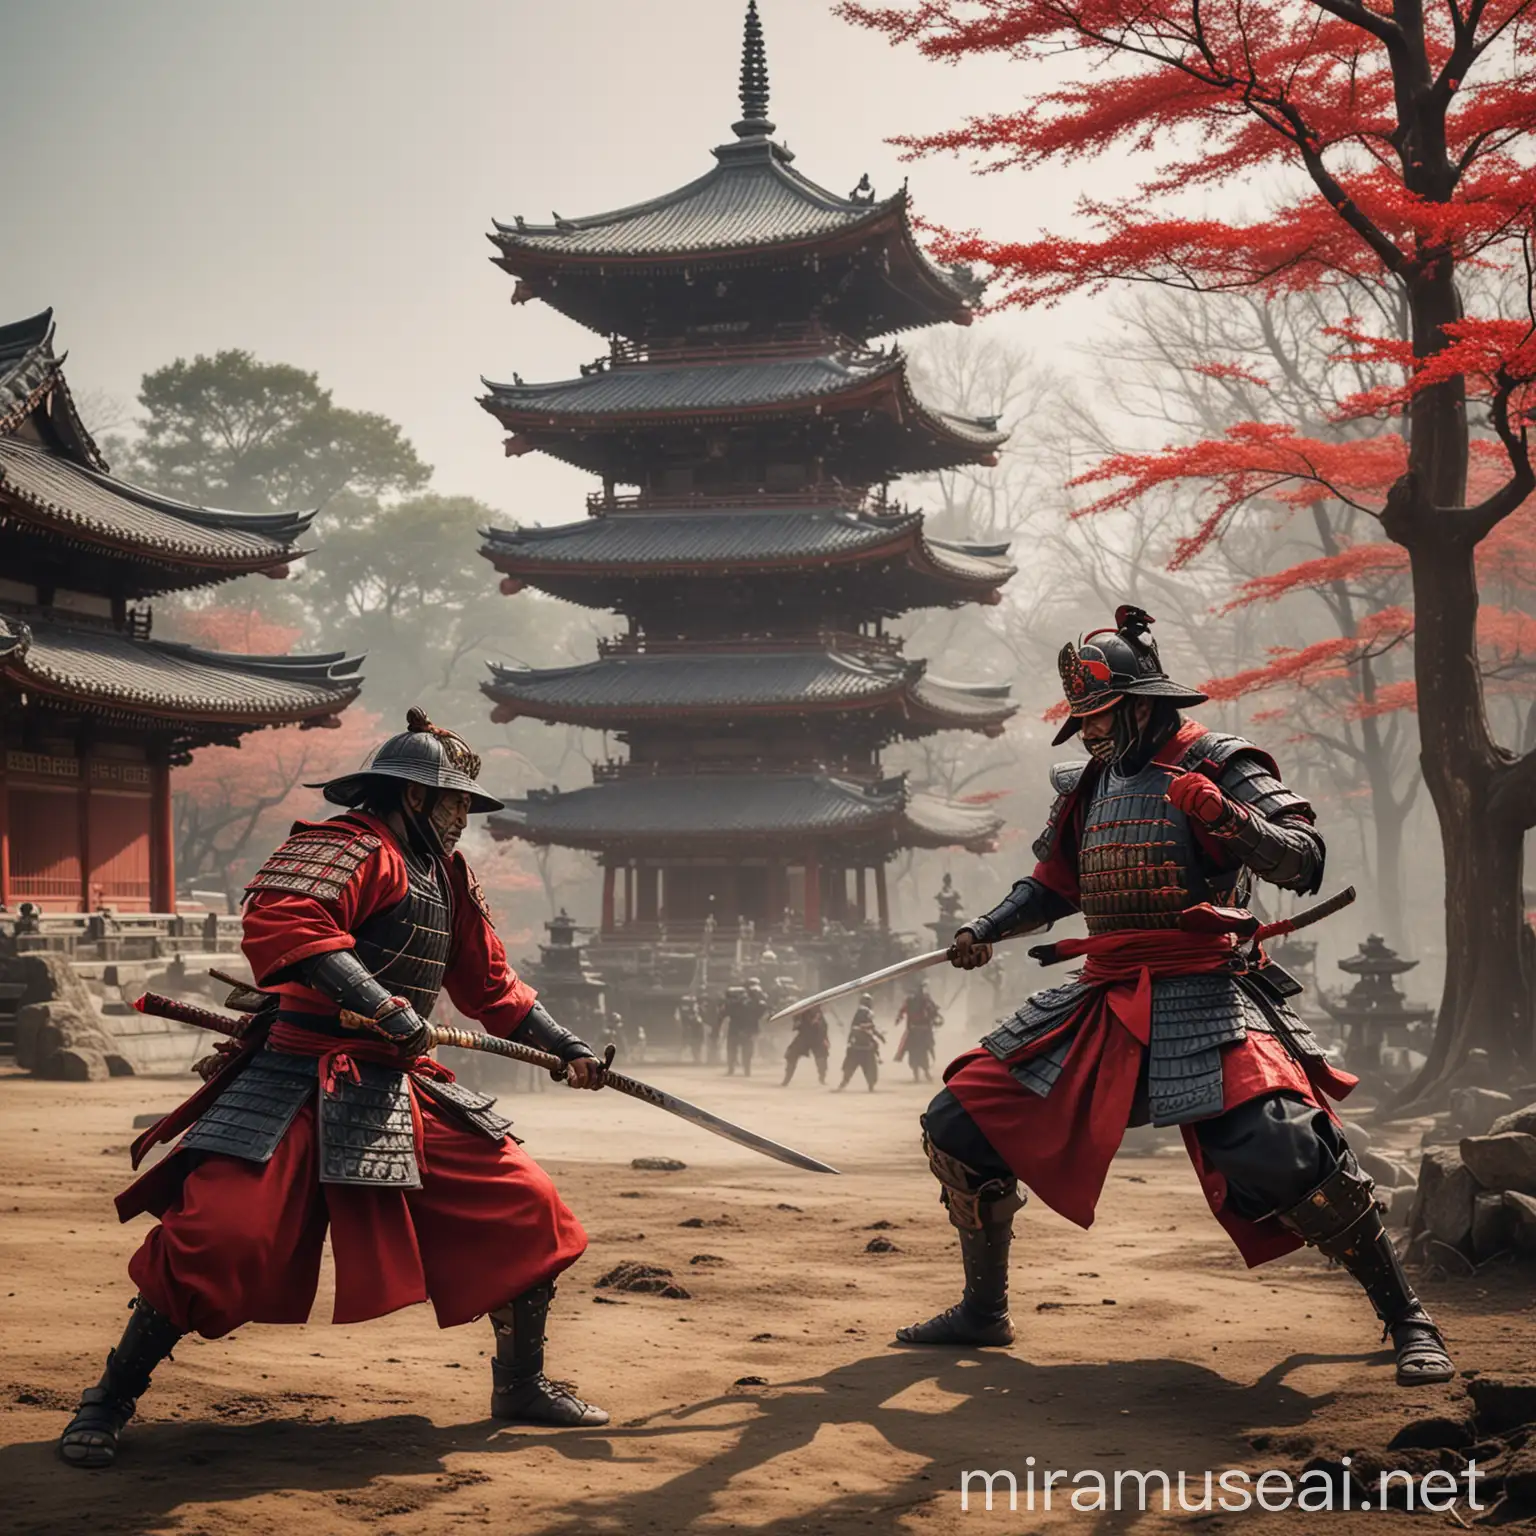 Clashing Samurai Warriors in Red and Black Armor with Pagoda Backdrop